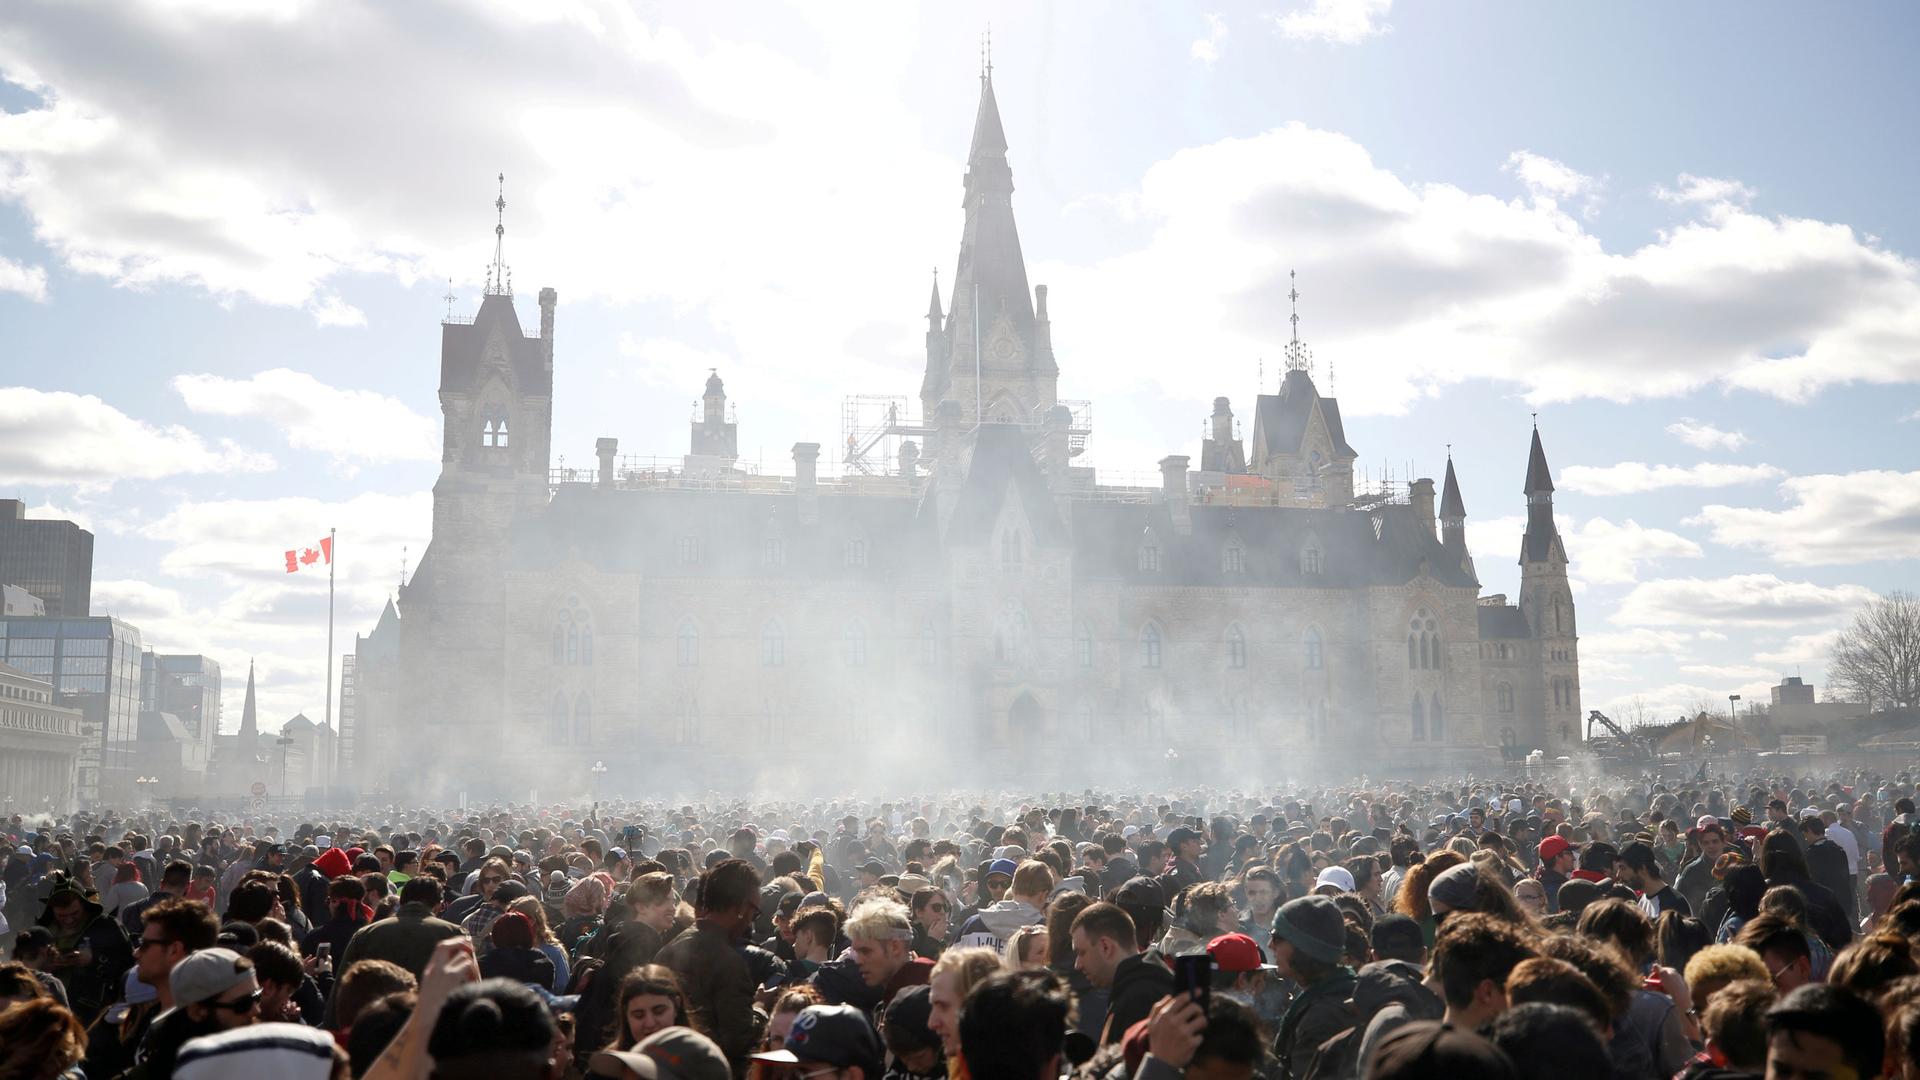 Smoke rises above a crowd assembled in front of the Ottawa government building